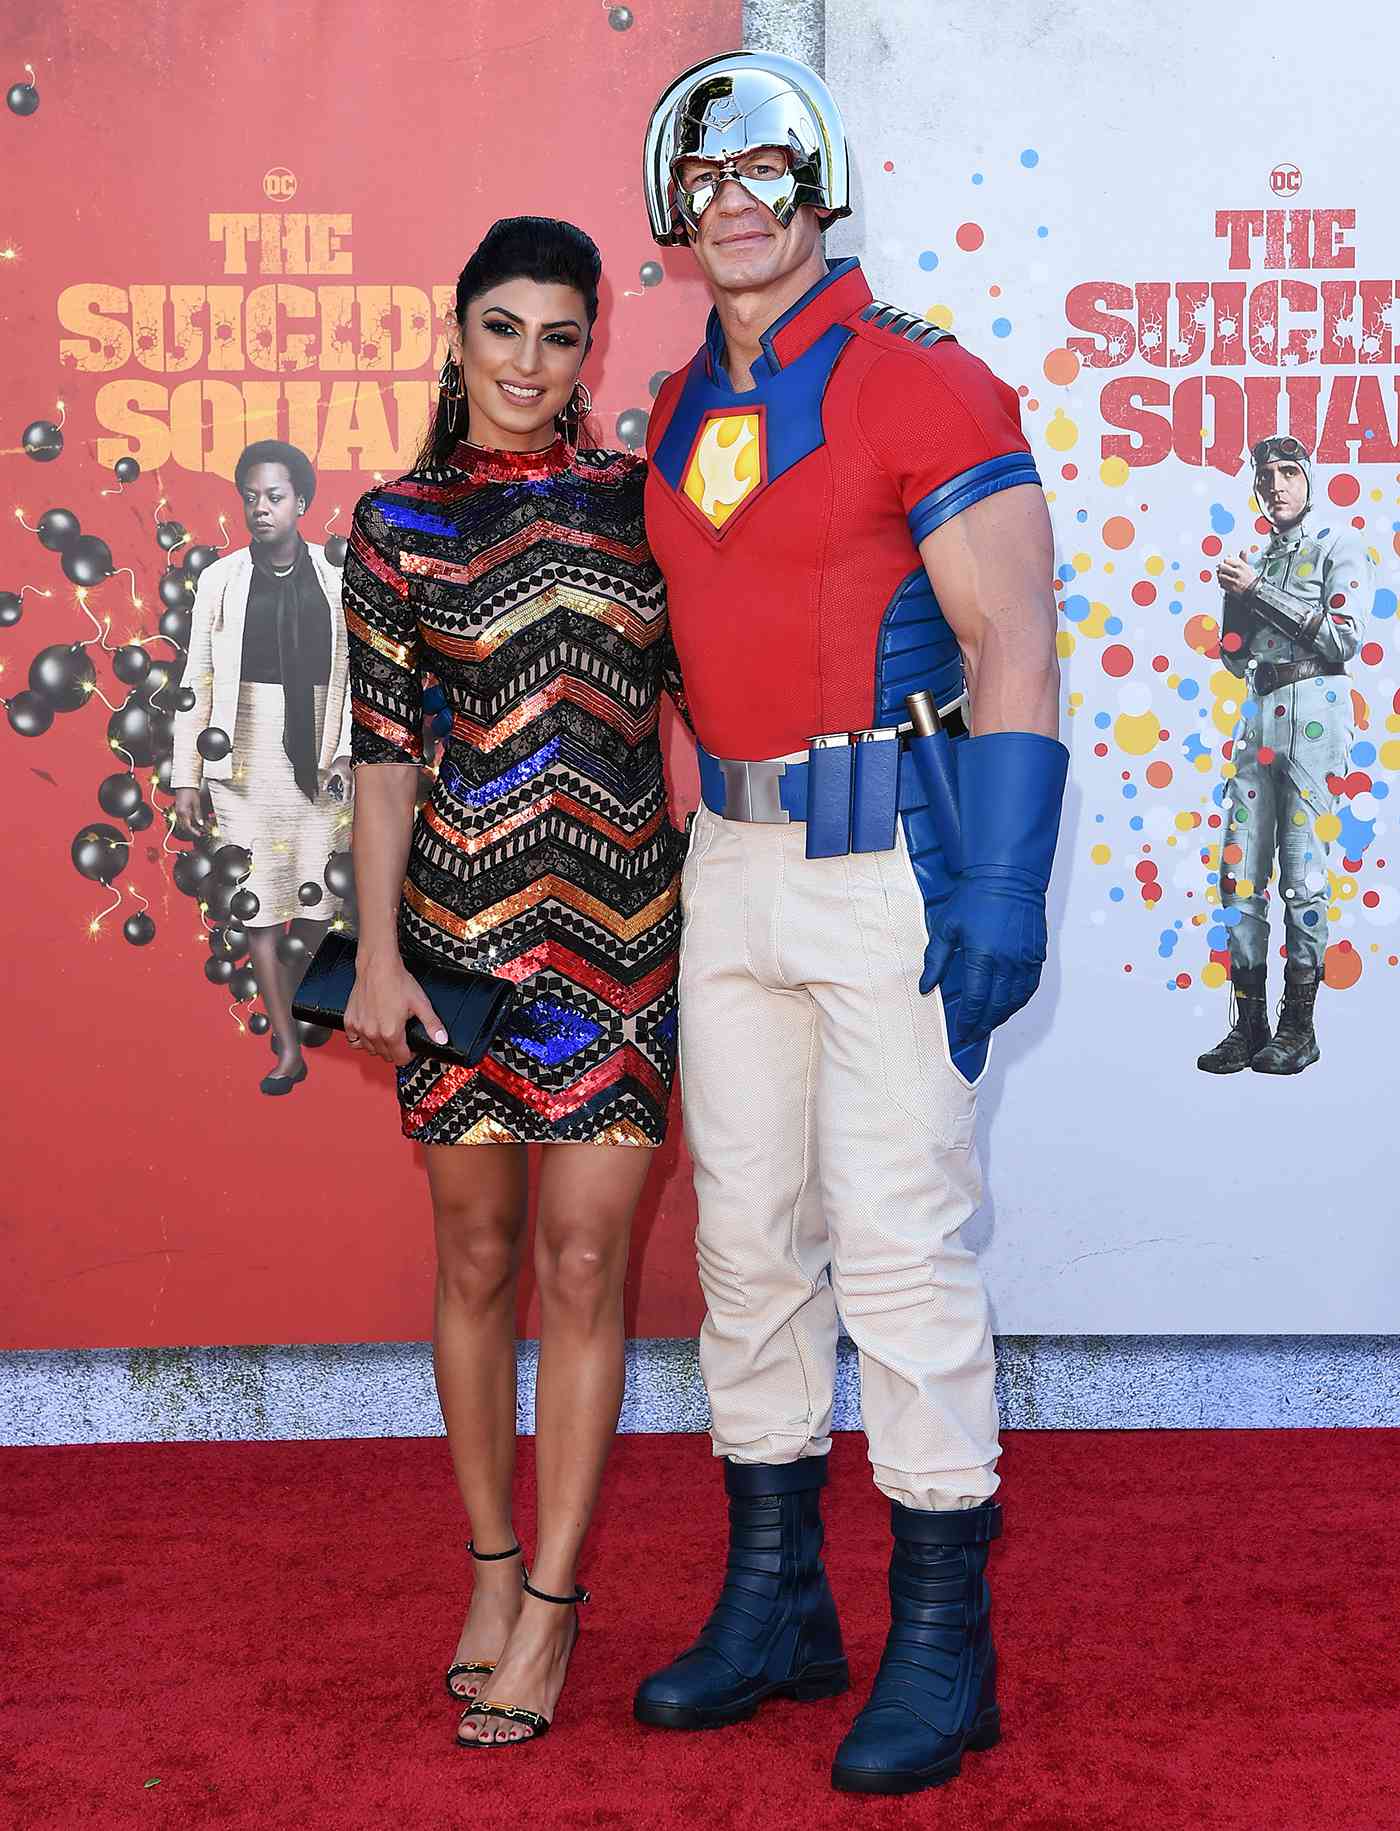 Shay Shariatzadeh and John Cena attend Warner Bros. Premiere of "The Suicide Squad" at The Landmark Westwood on August 02, 2021 in Los Angeles, California.